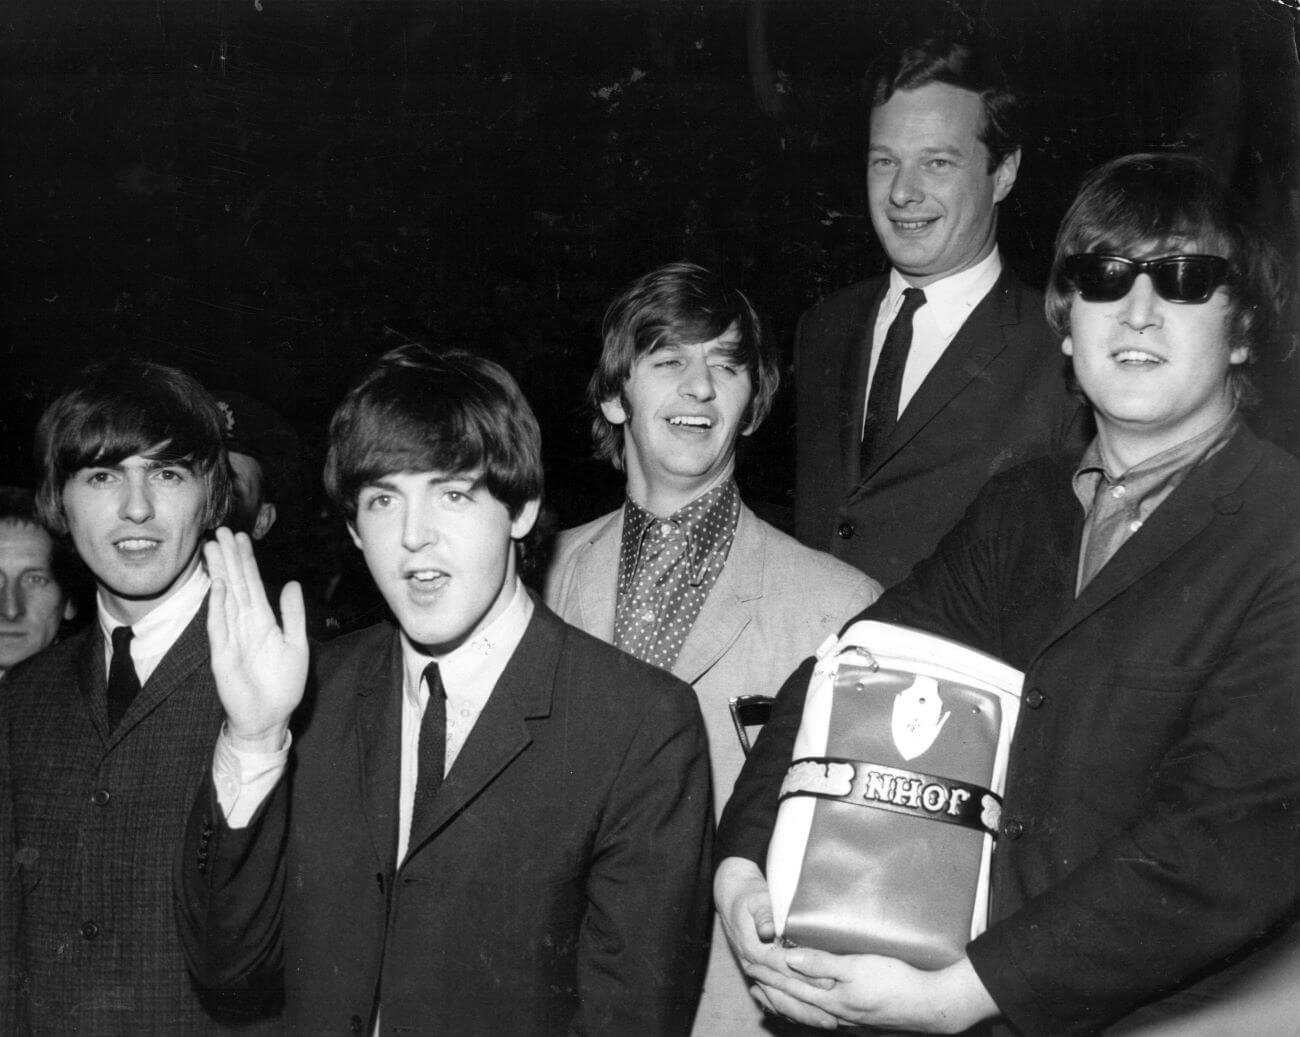 A black and white picture of George Harrison, Paul McCartney, Ringo Starr, Brian Epstein, and John Lennon. Lennon wears sunglasses and holds a bag.